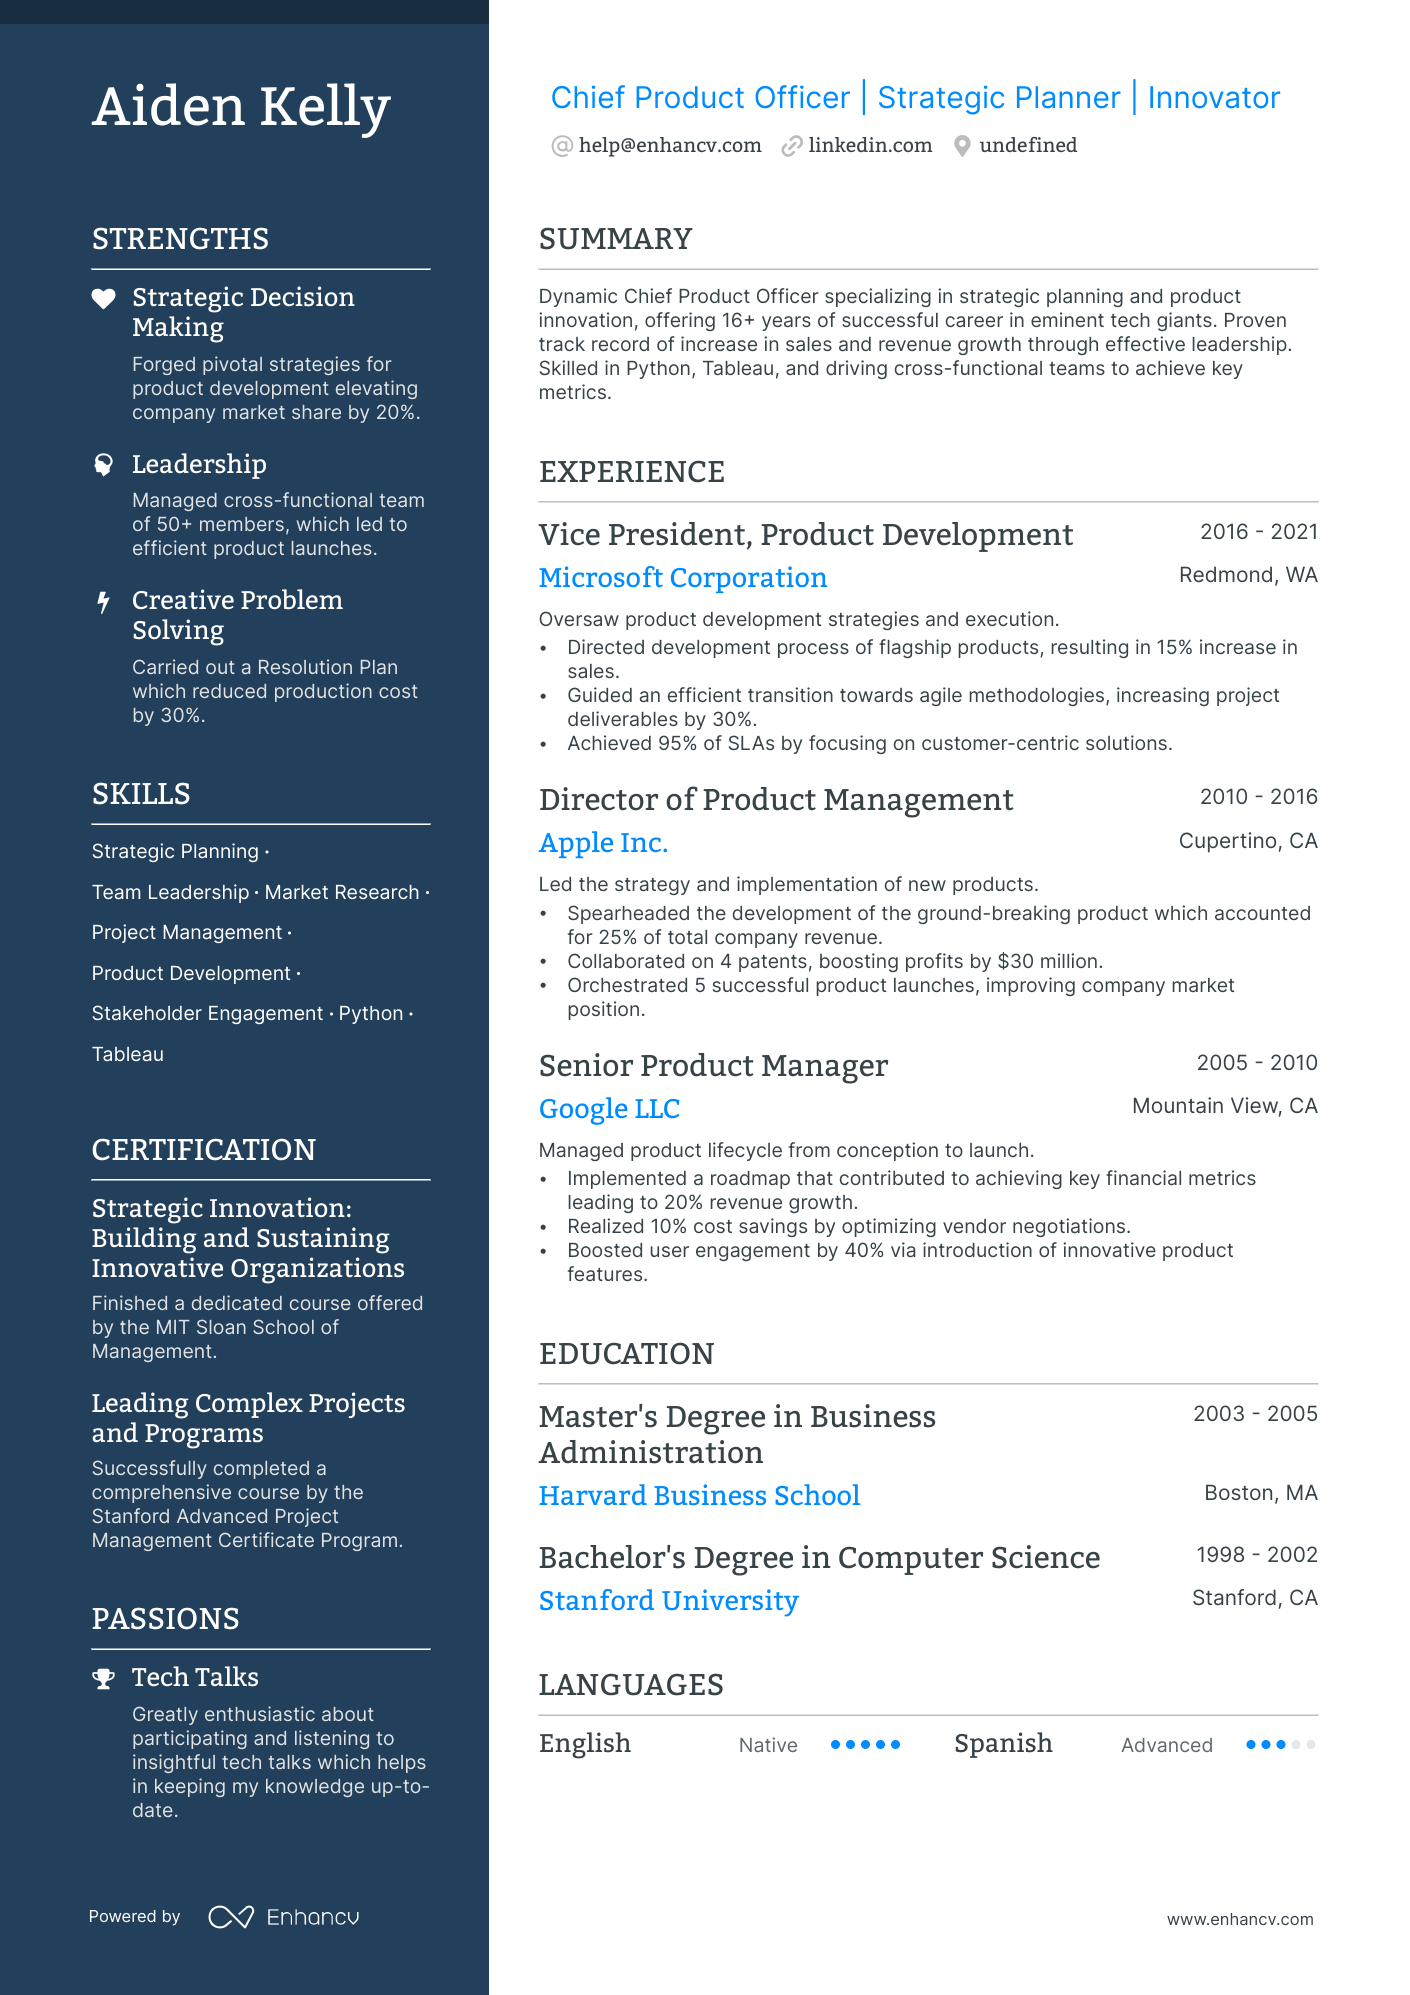 Chief Product Officer resume example